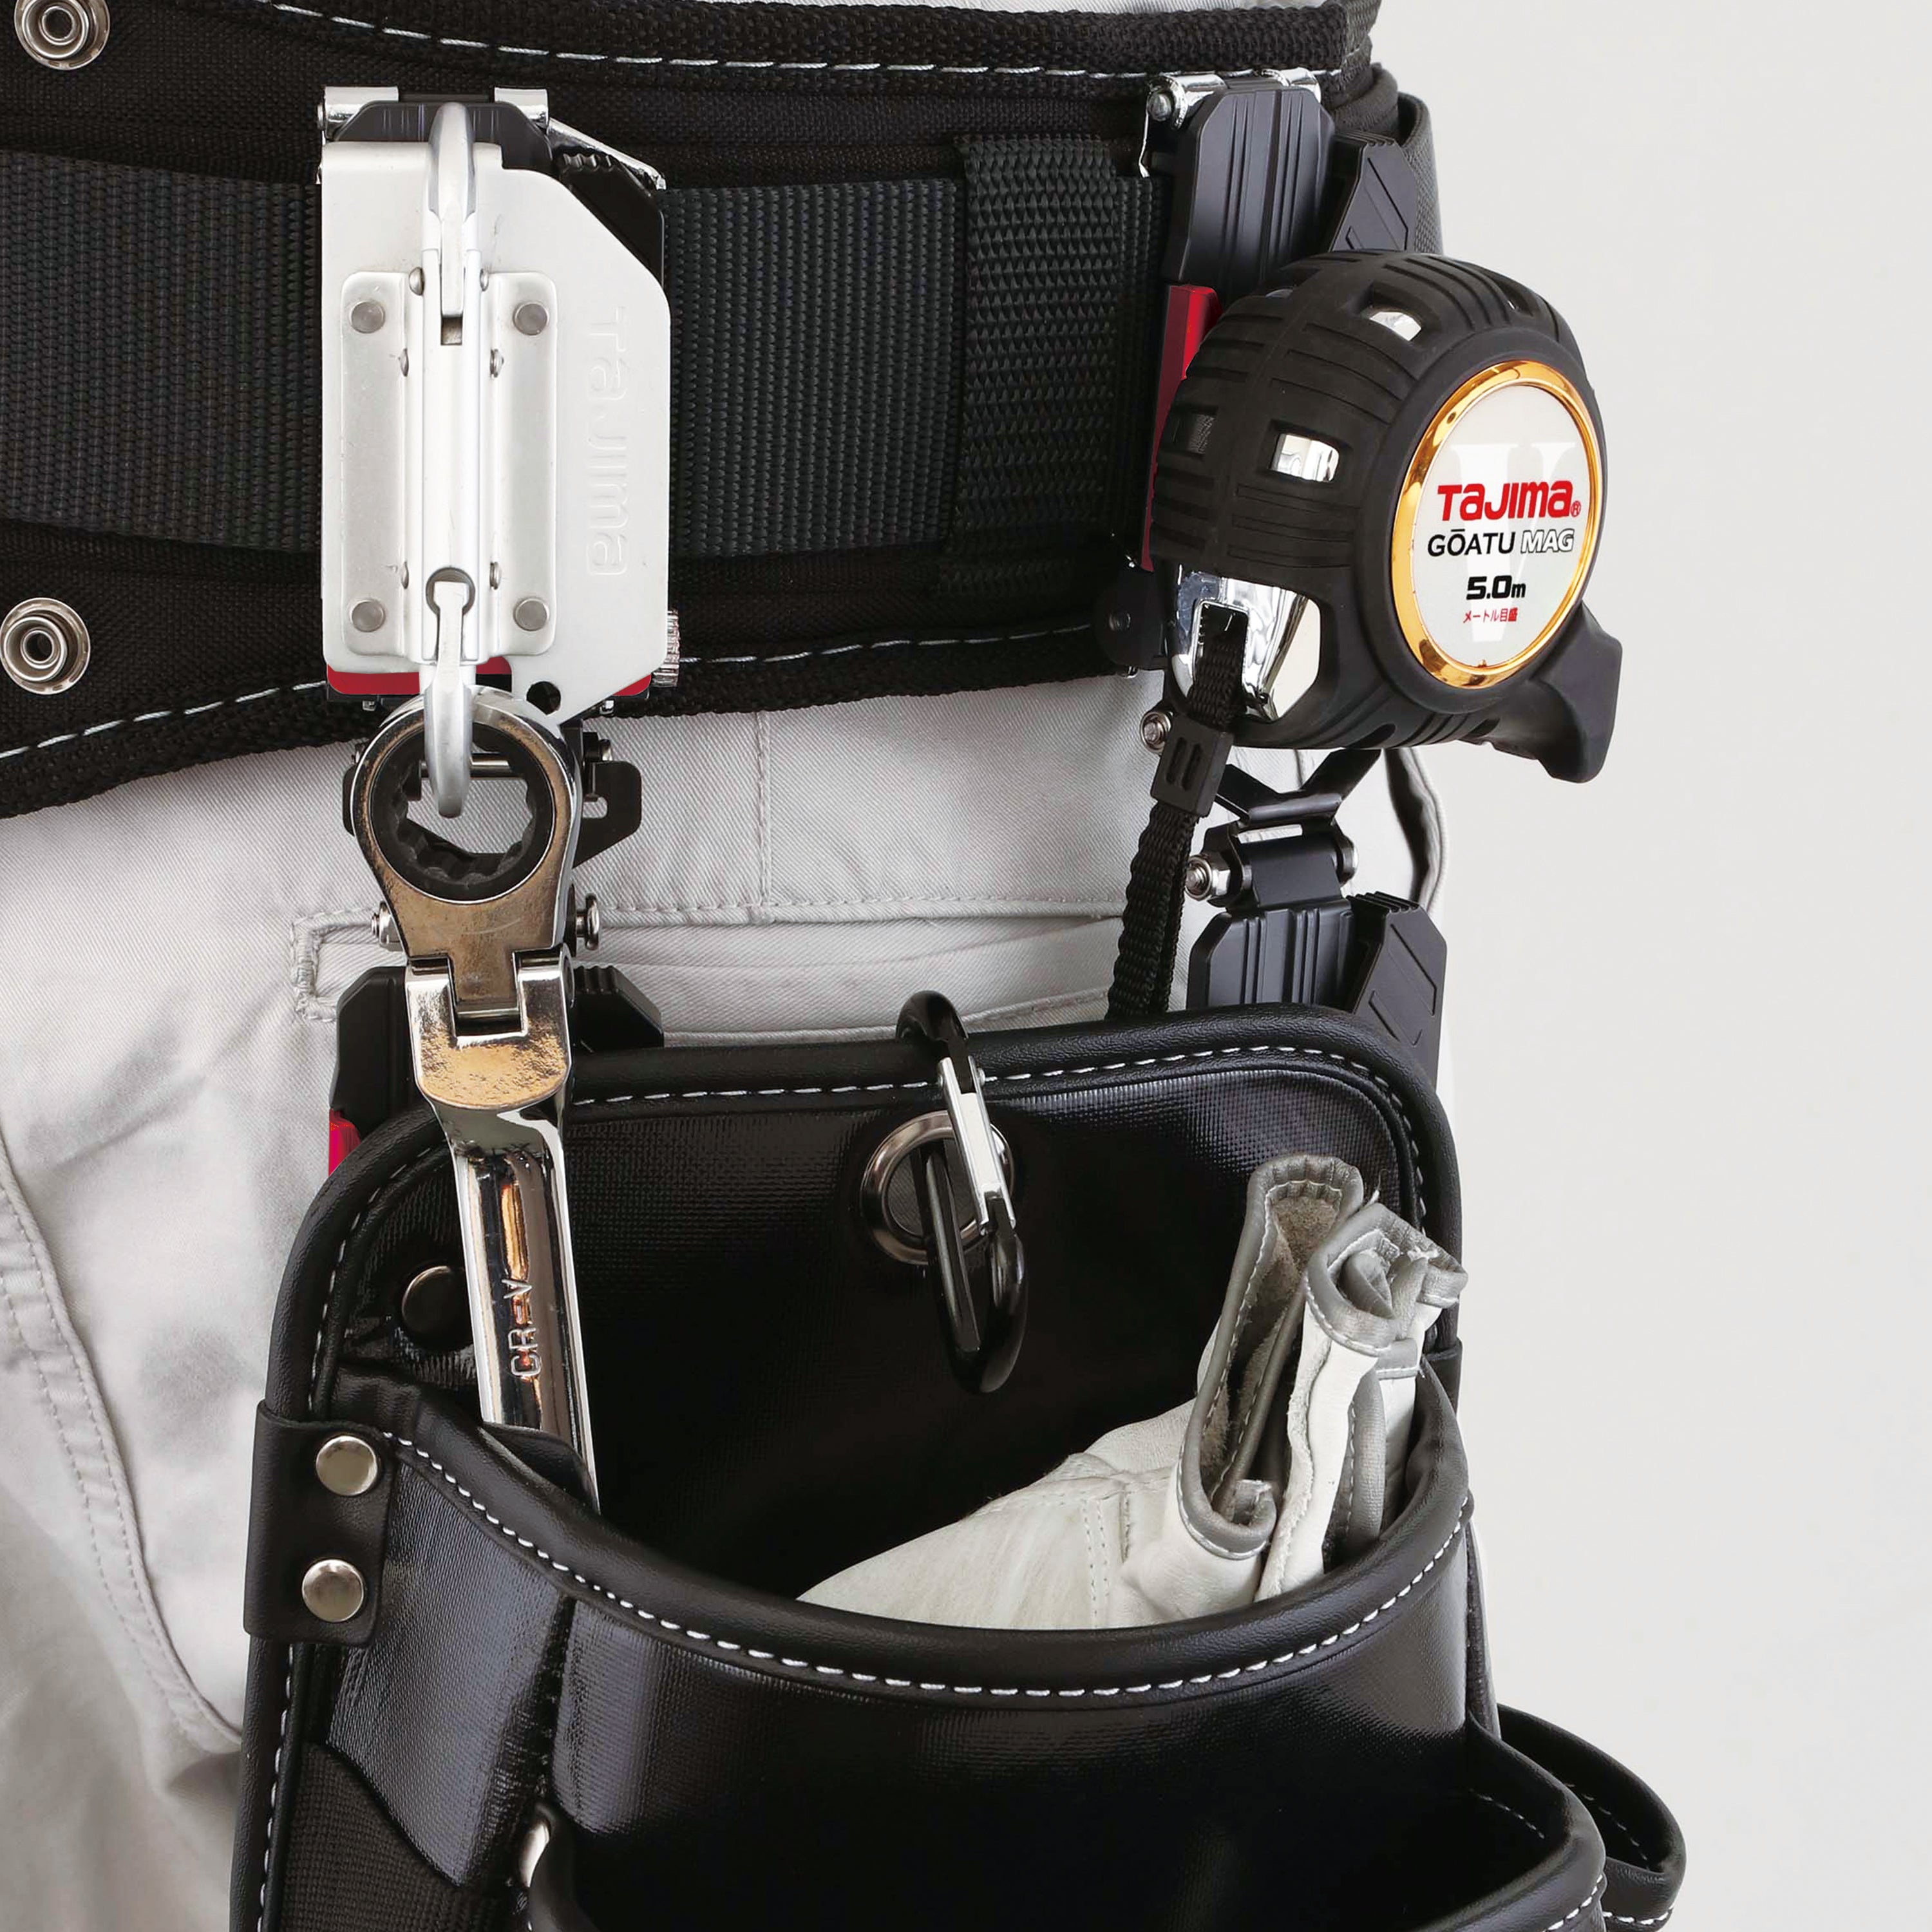 Tajima Safety Holder for Waist Belt, Metal, Top and Bottom, Right, 2 Rows,  4 Colors, Limited Edition